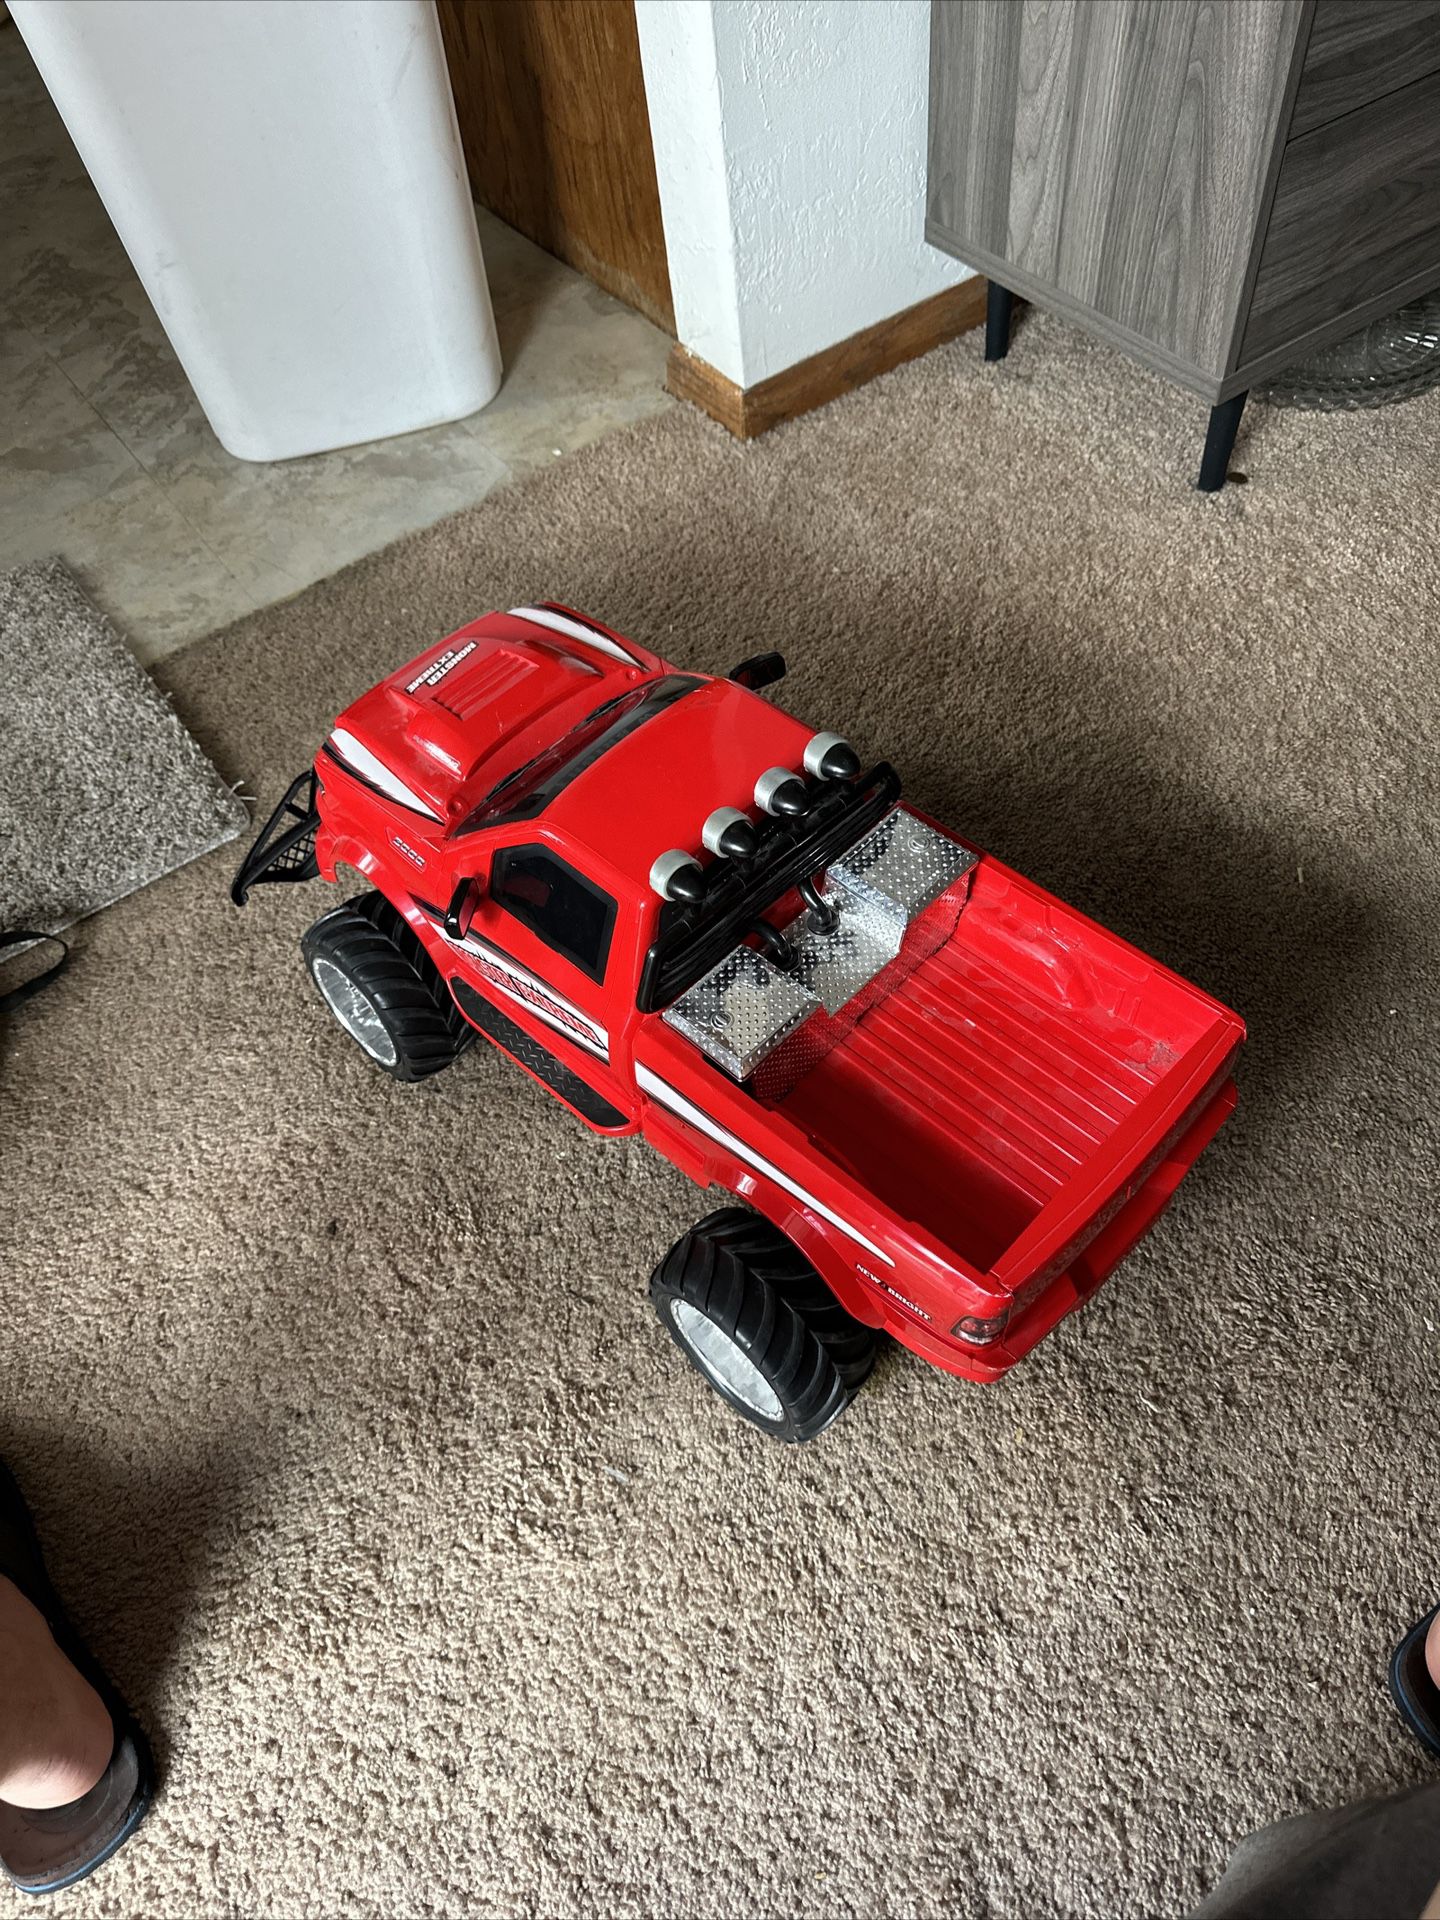 New Bright Dodge Ram Monster Extreme Red RC truck